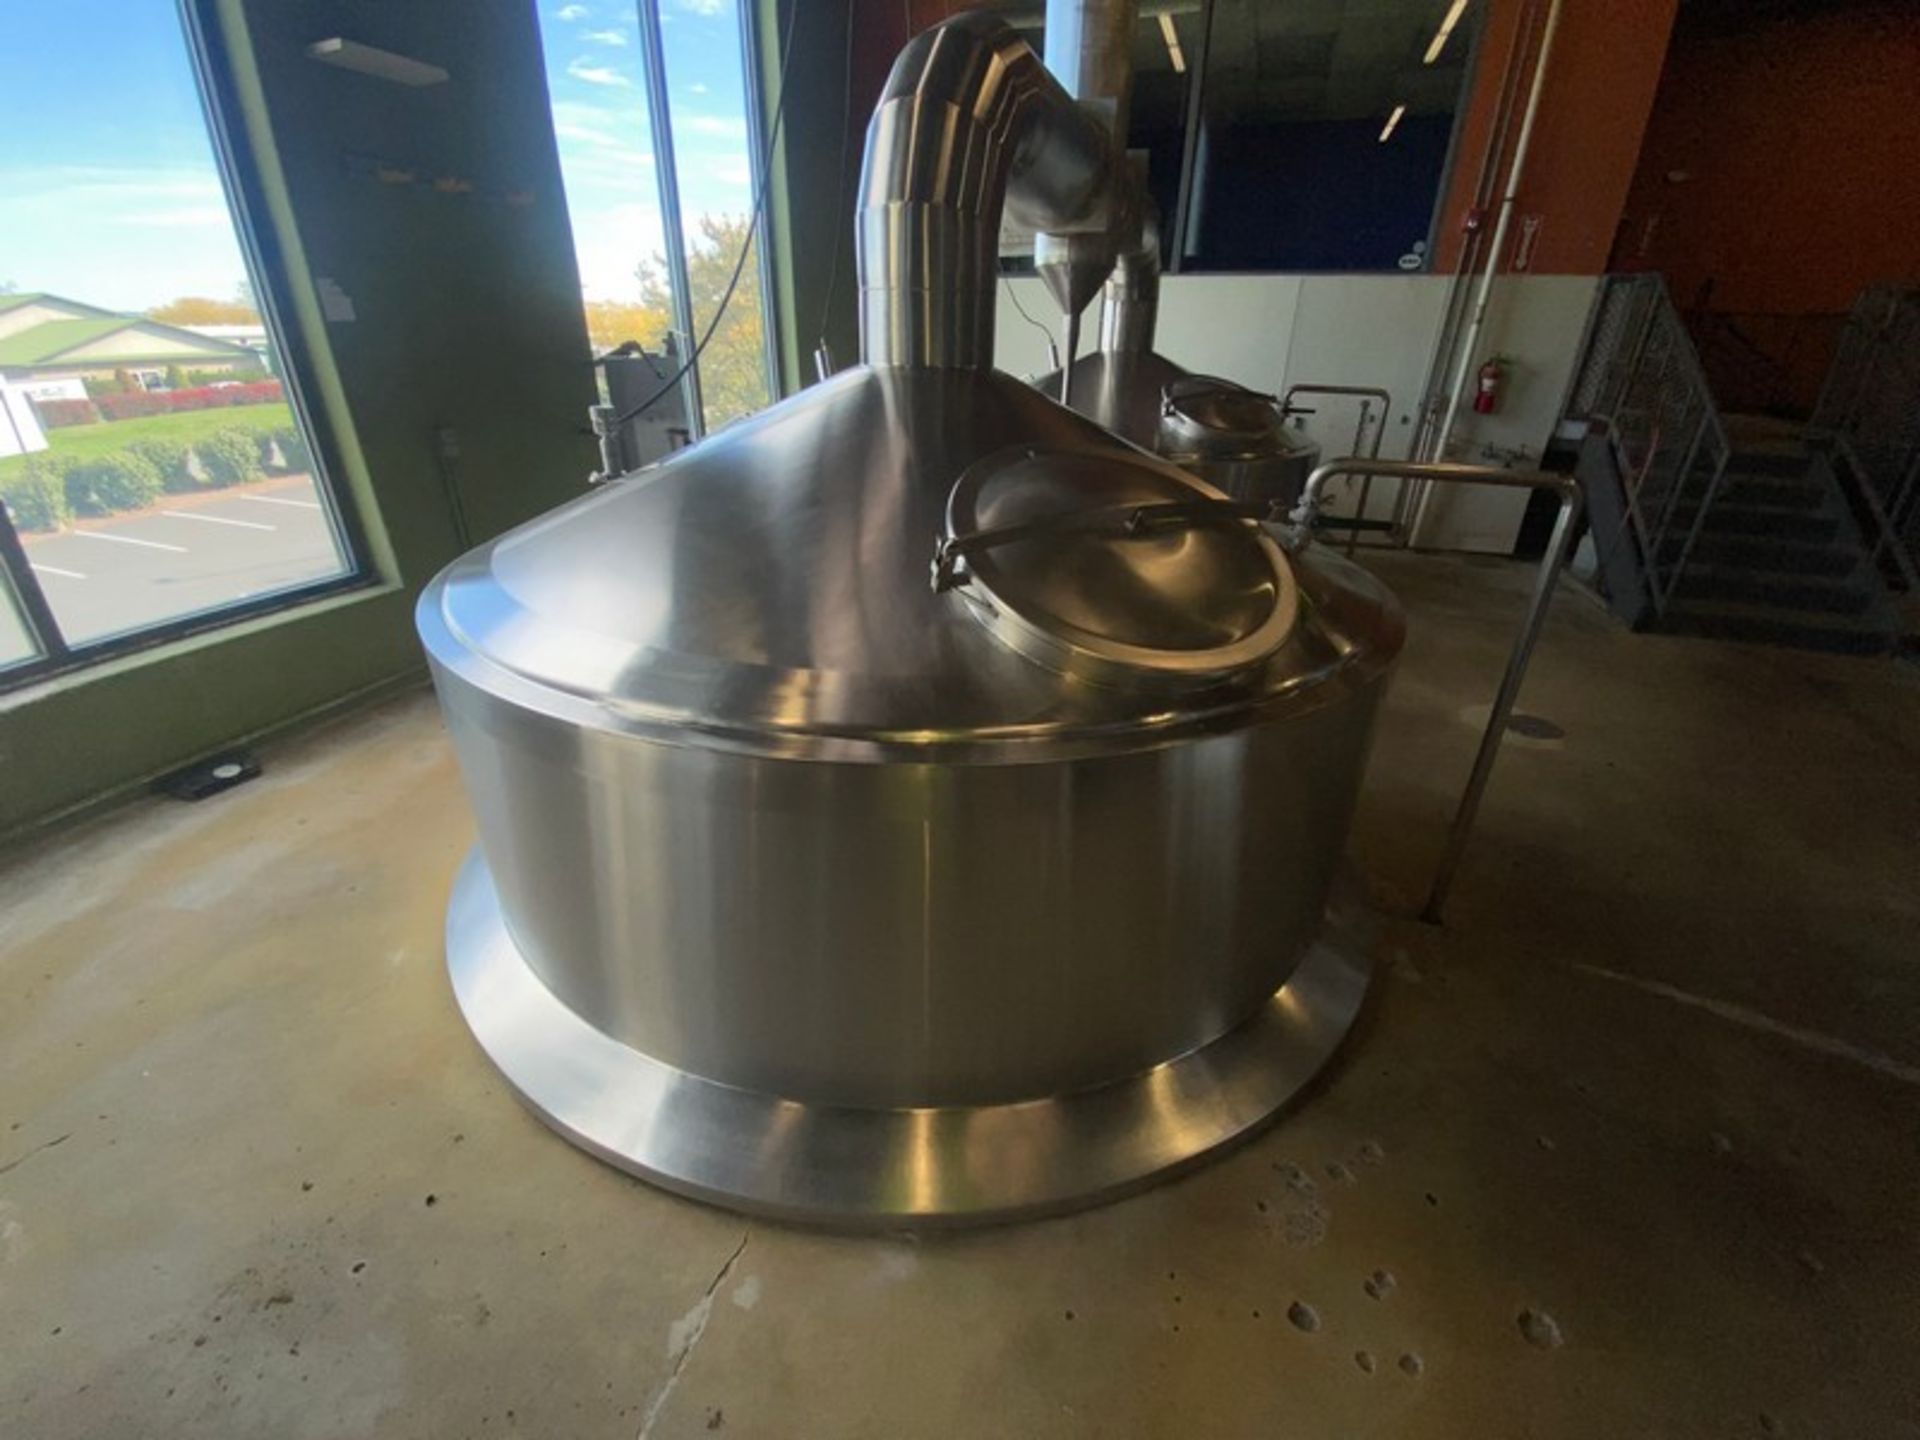 50 BBL (2,200 GAL.) S/S Brew Kettle, with S/S Top Mounted Hinge Man-Door, Mounted on S/S Legs & Fram